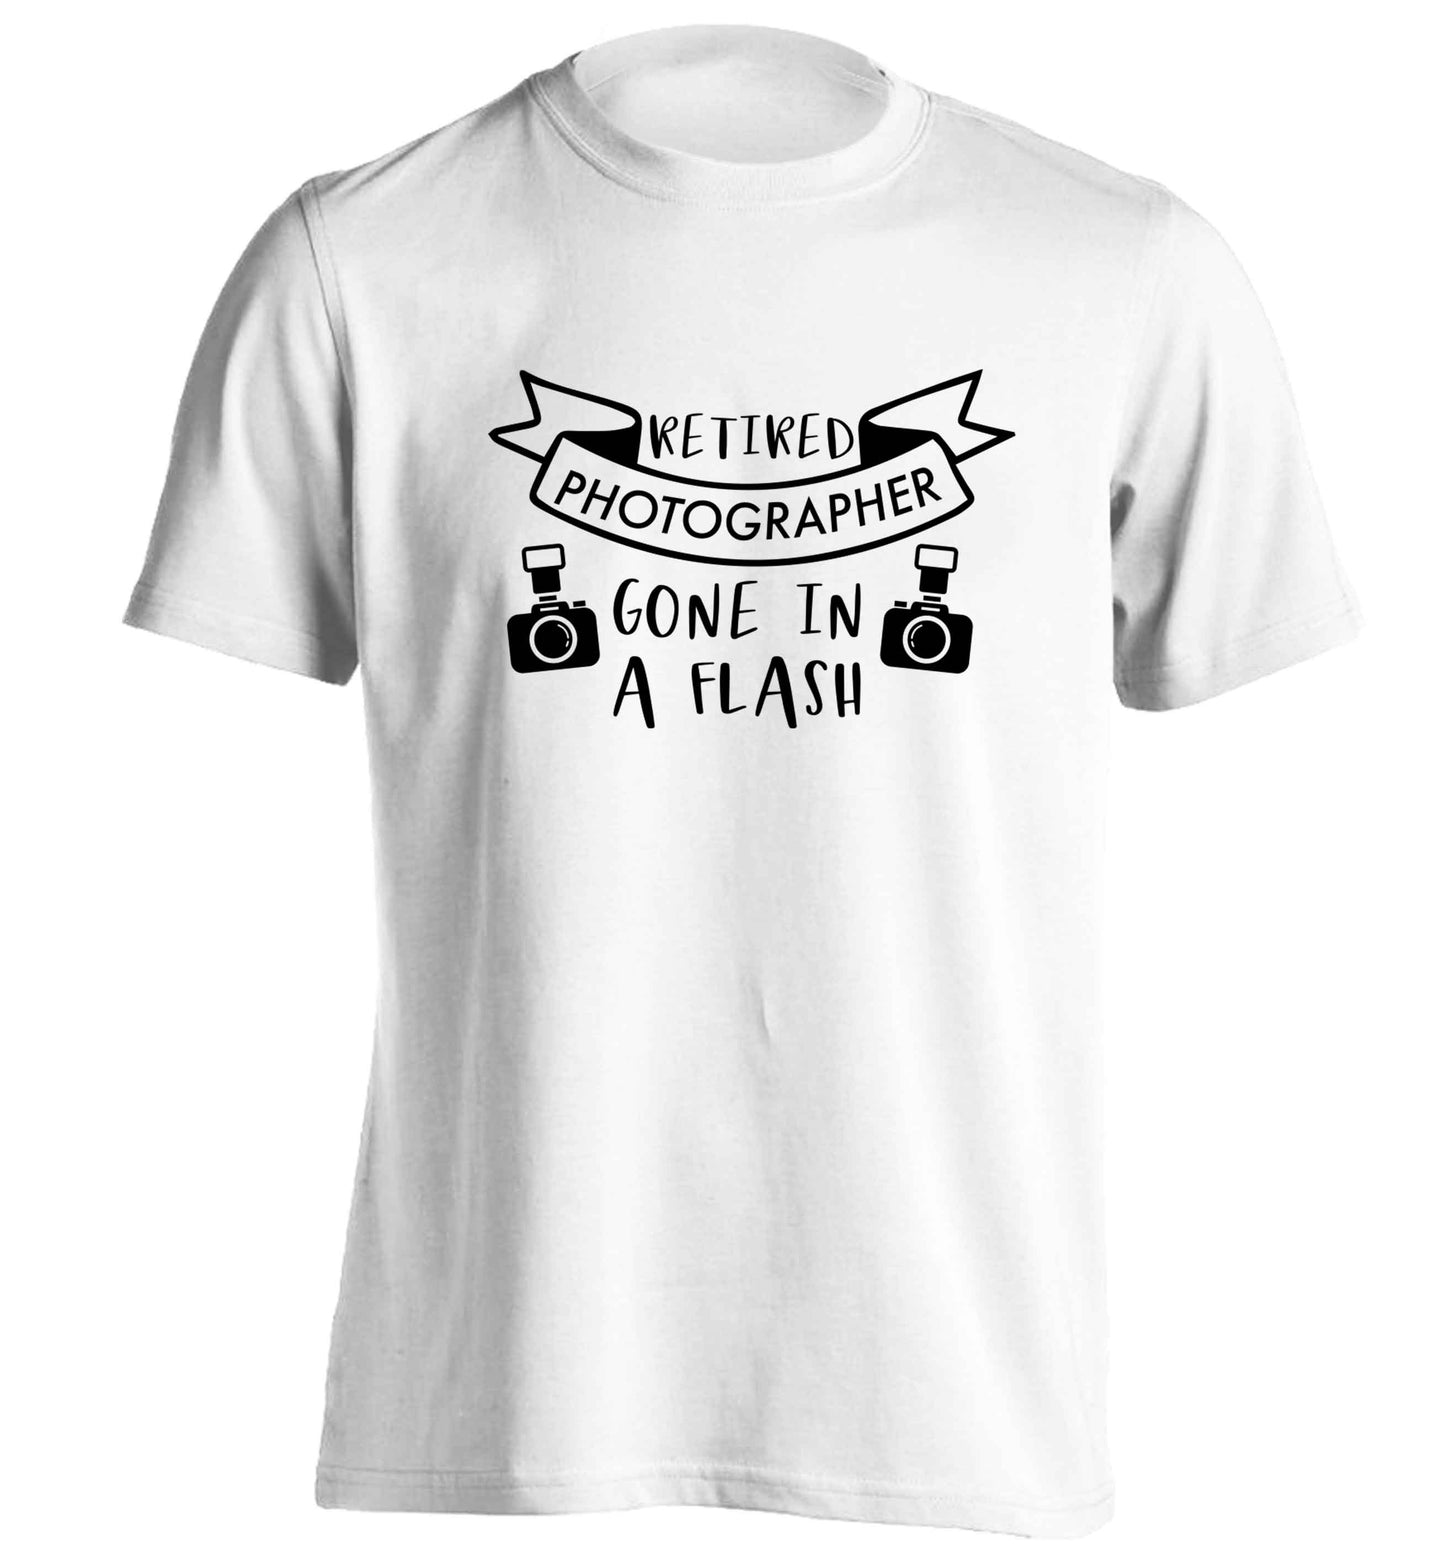 Retired photographer gone in a flash adults unisex white Tshirt 2XL